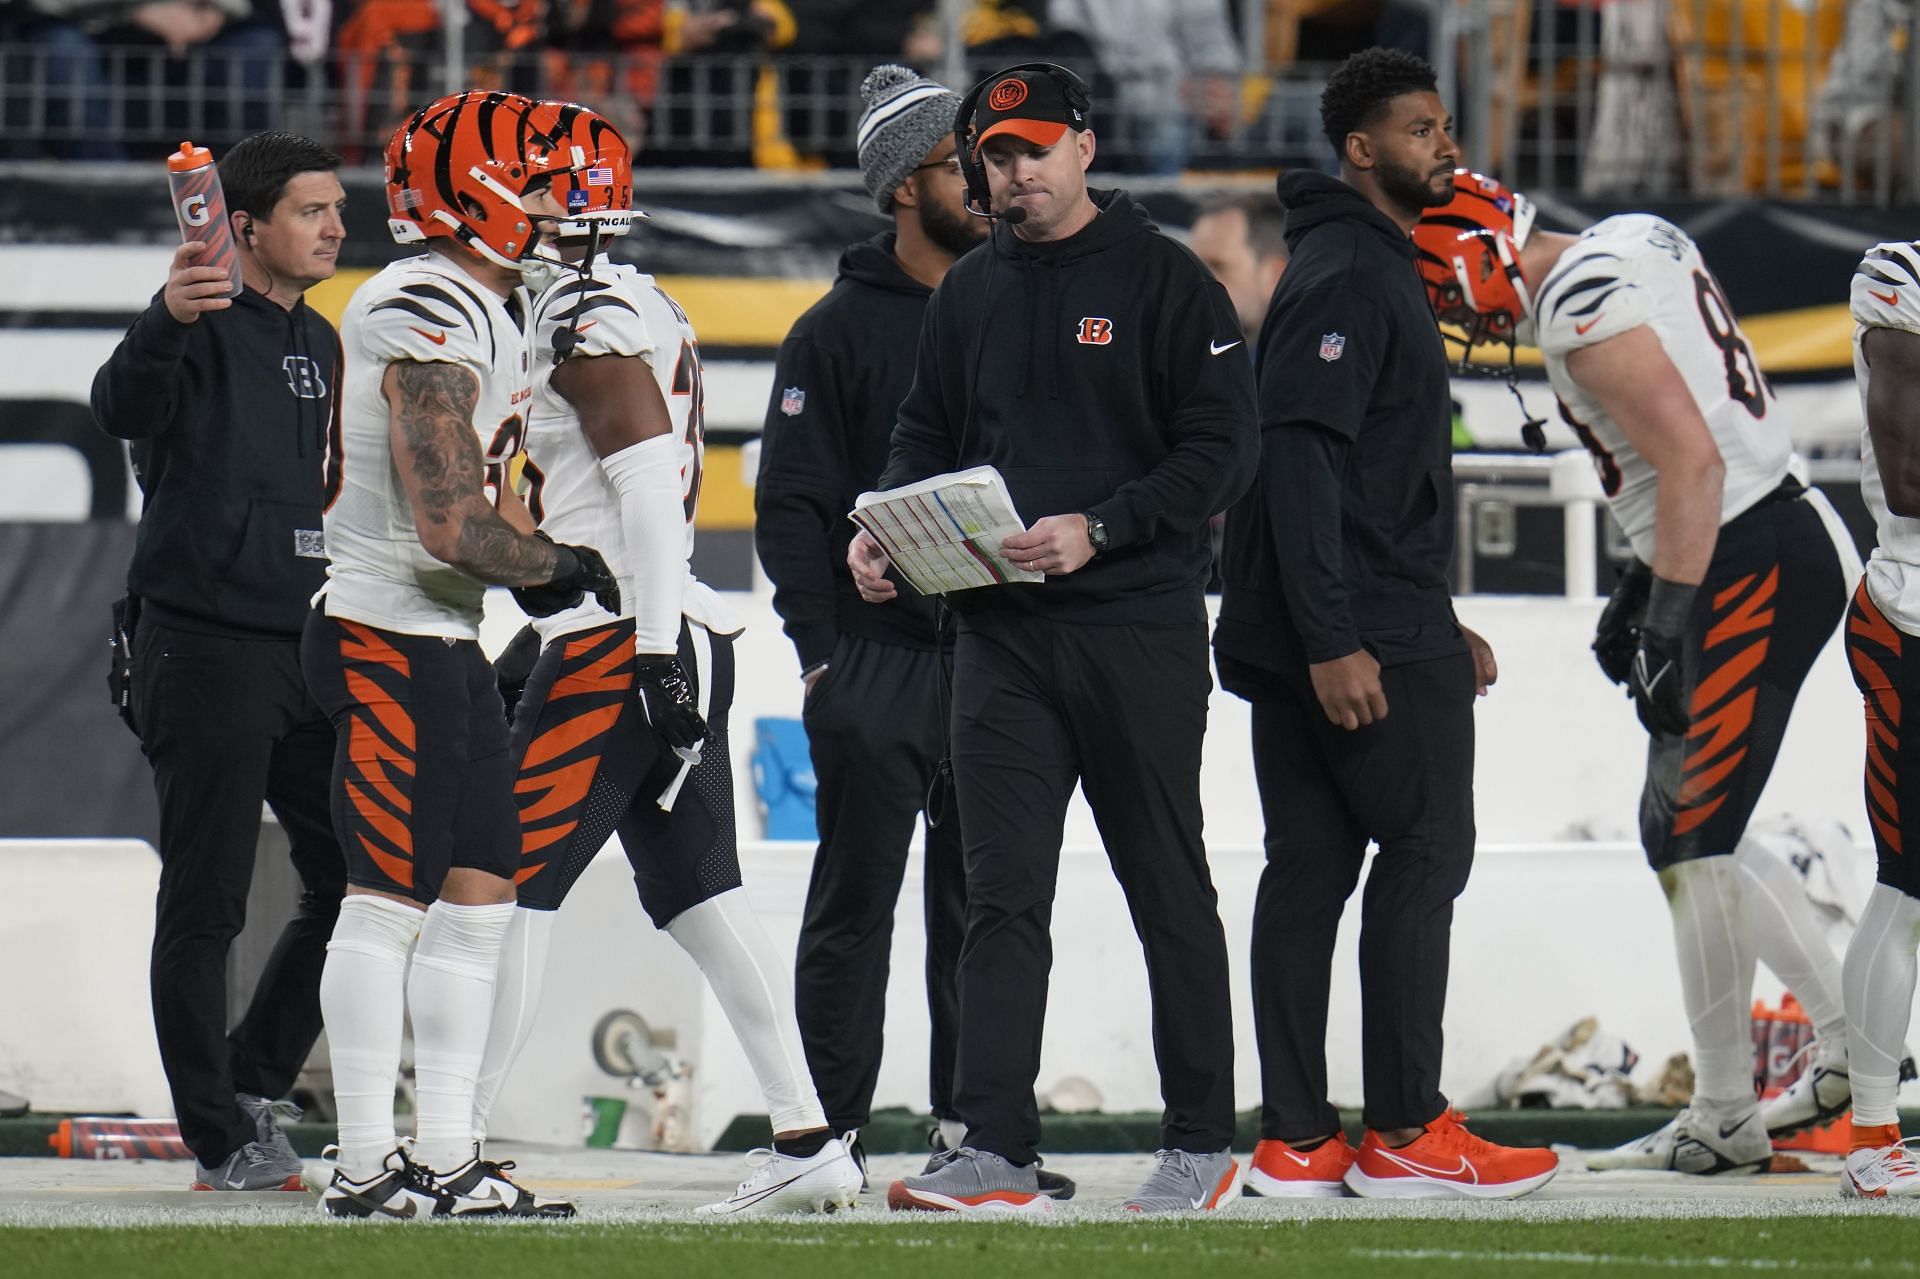 How can the Cincinnati Bengals make the playoffs? Qualifying scenarios